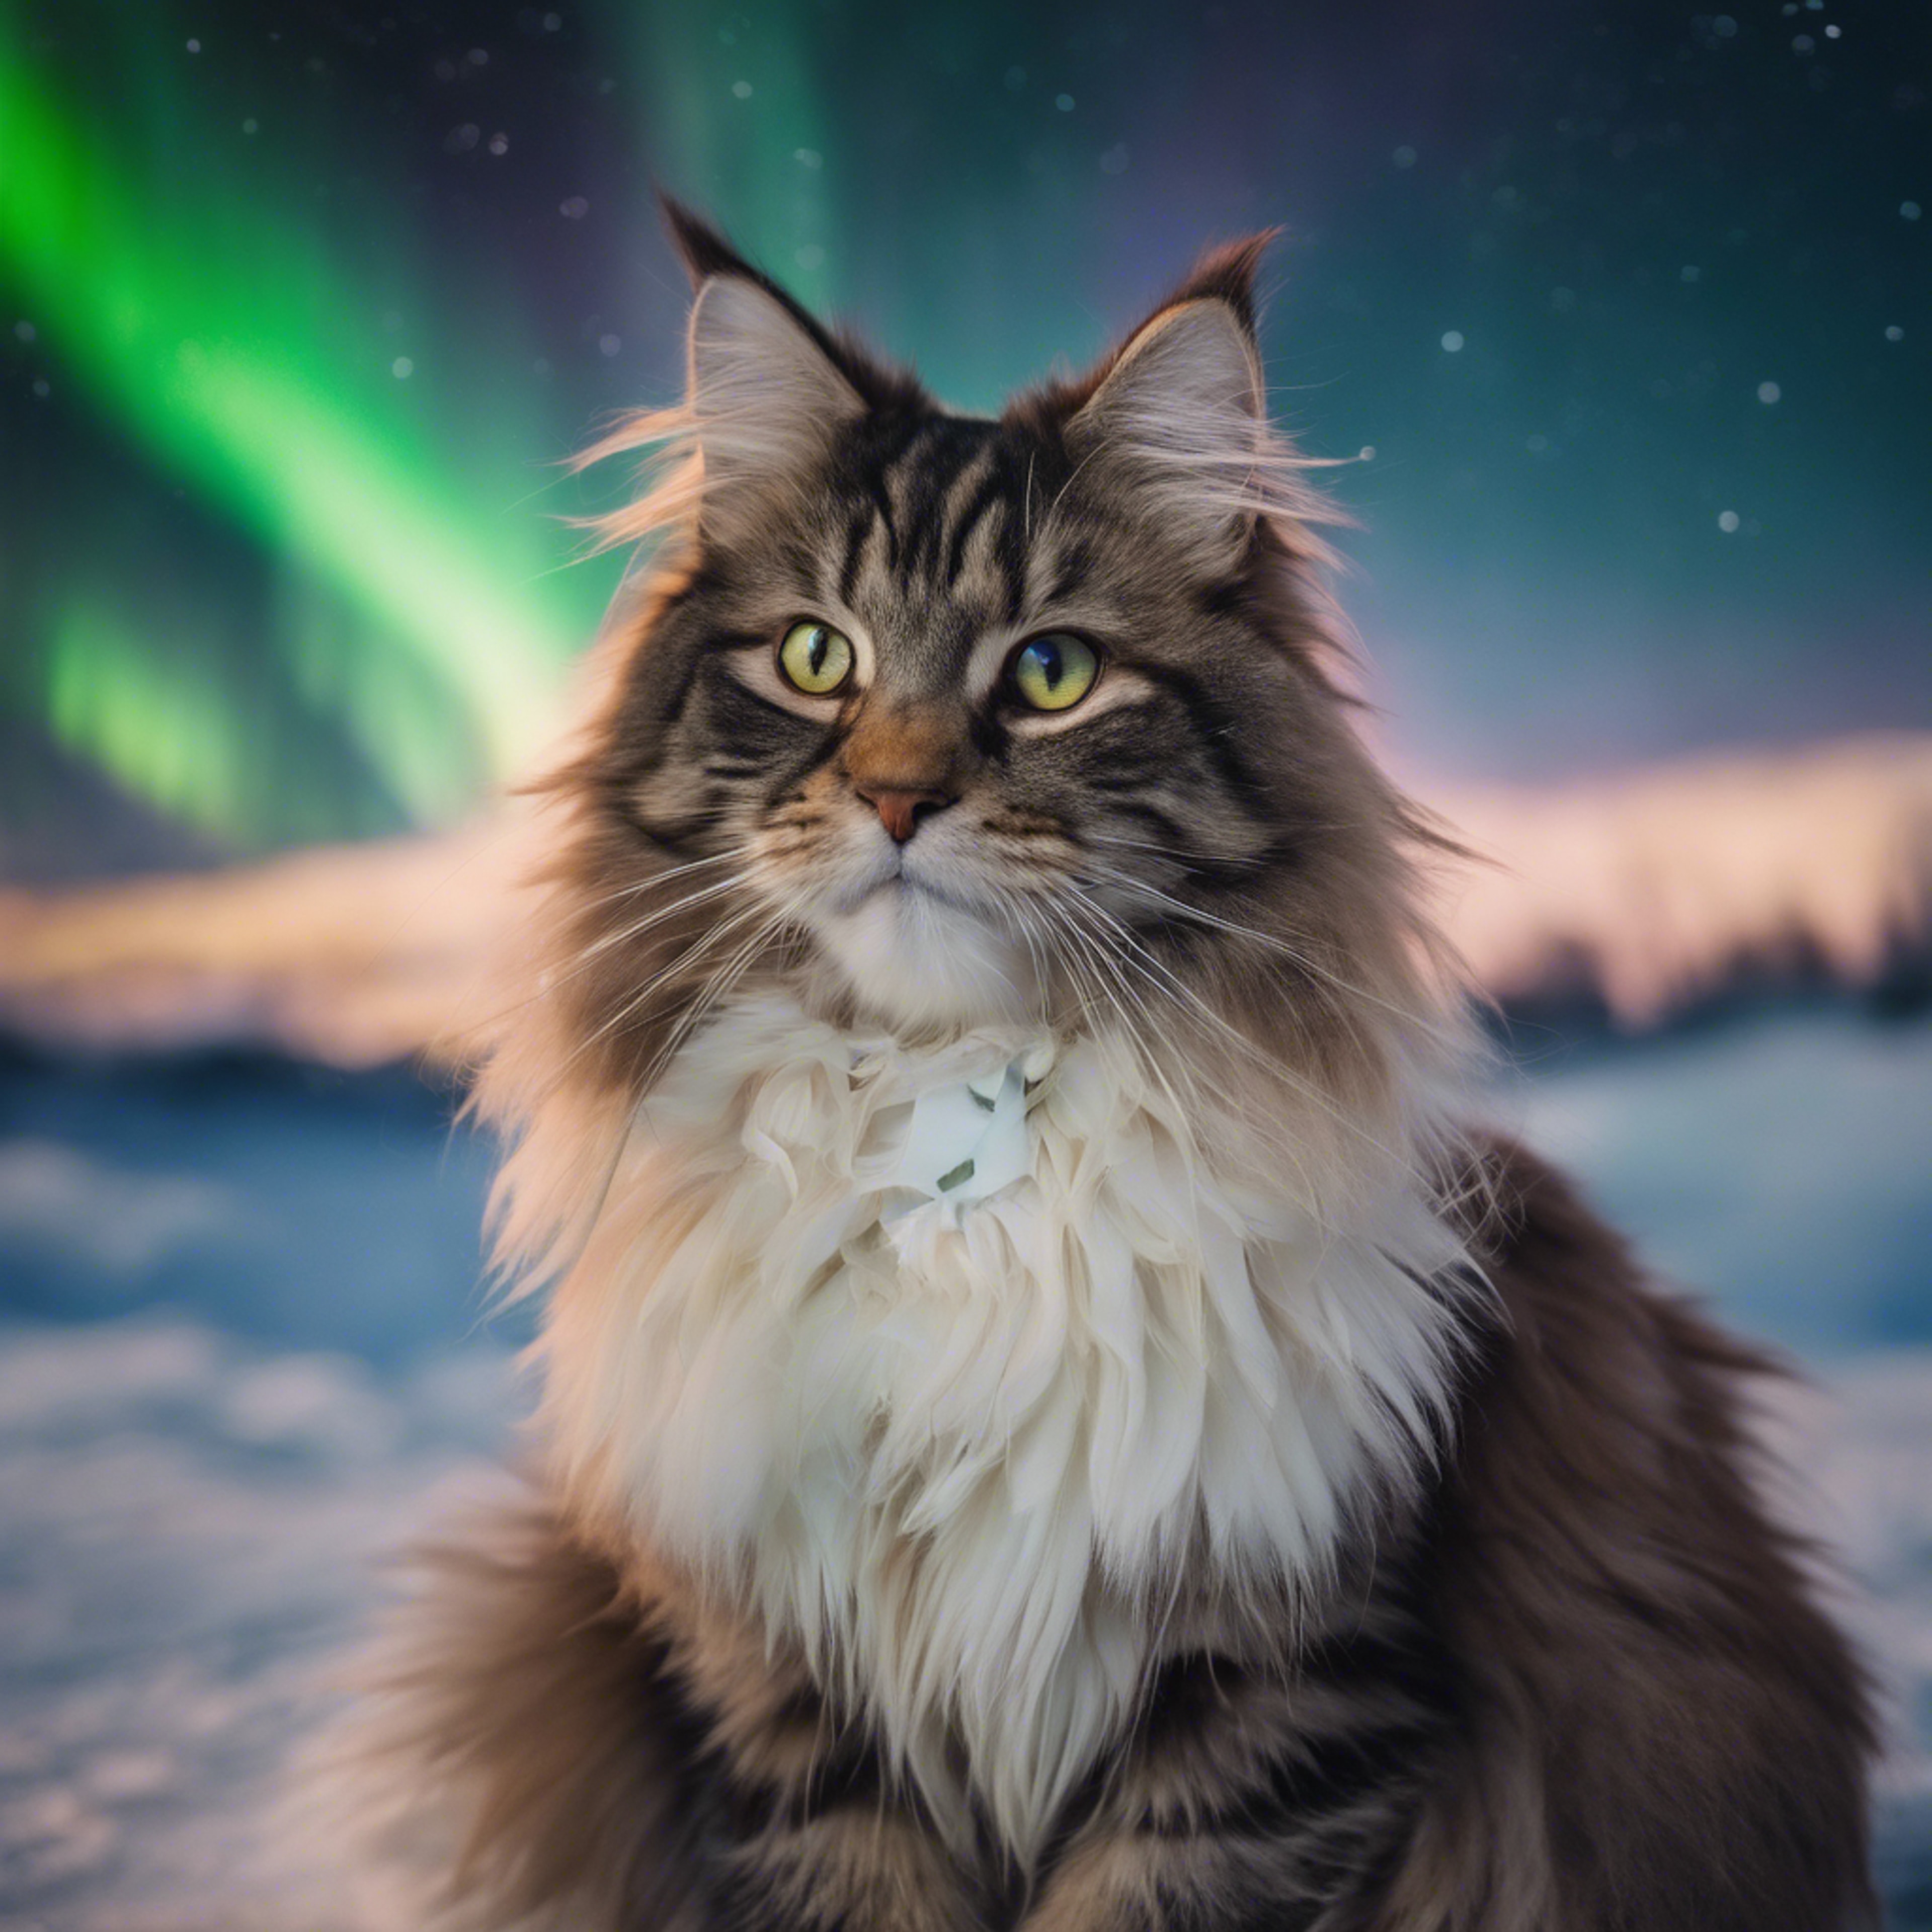 A Norwegian Forest cat sitting quietly under the aurora borealis, its eyes reflecting the dancing lights. Wallpaper[1b2a9174317e40c9a8f4]